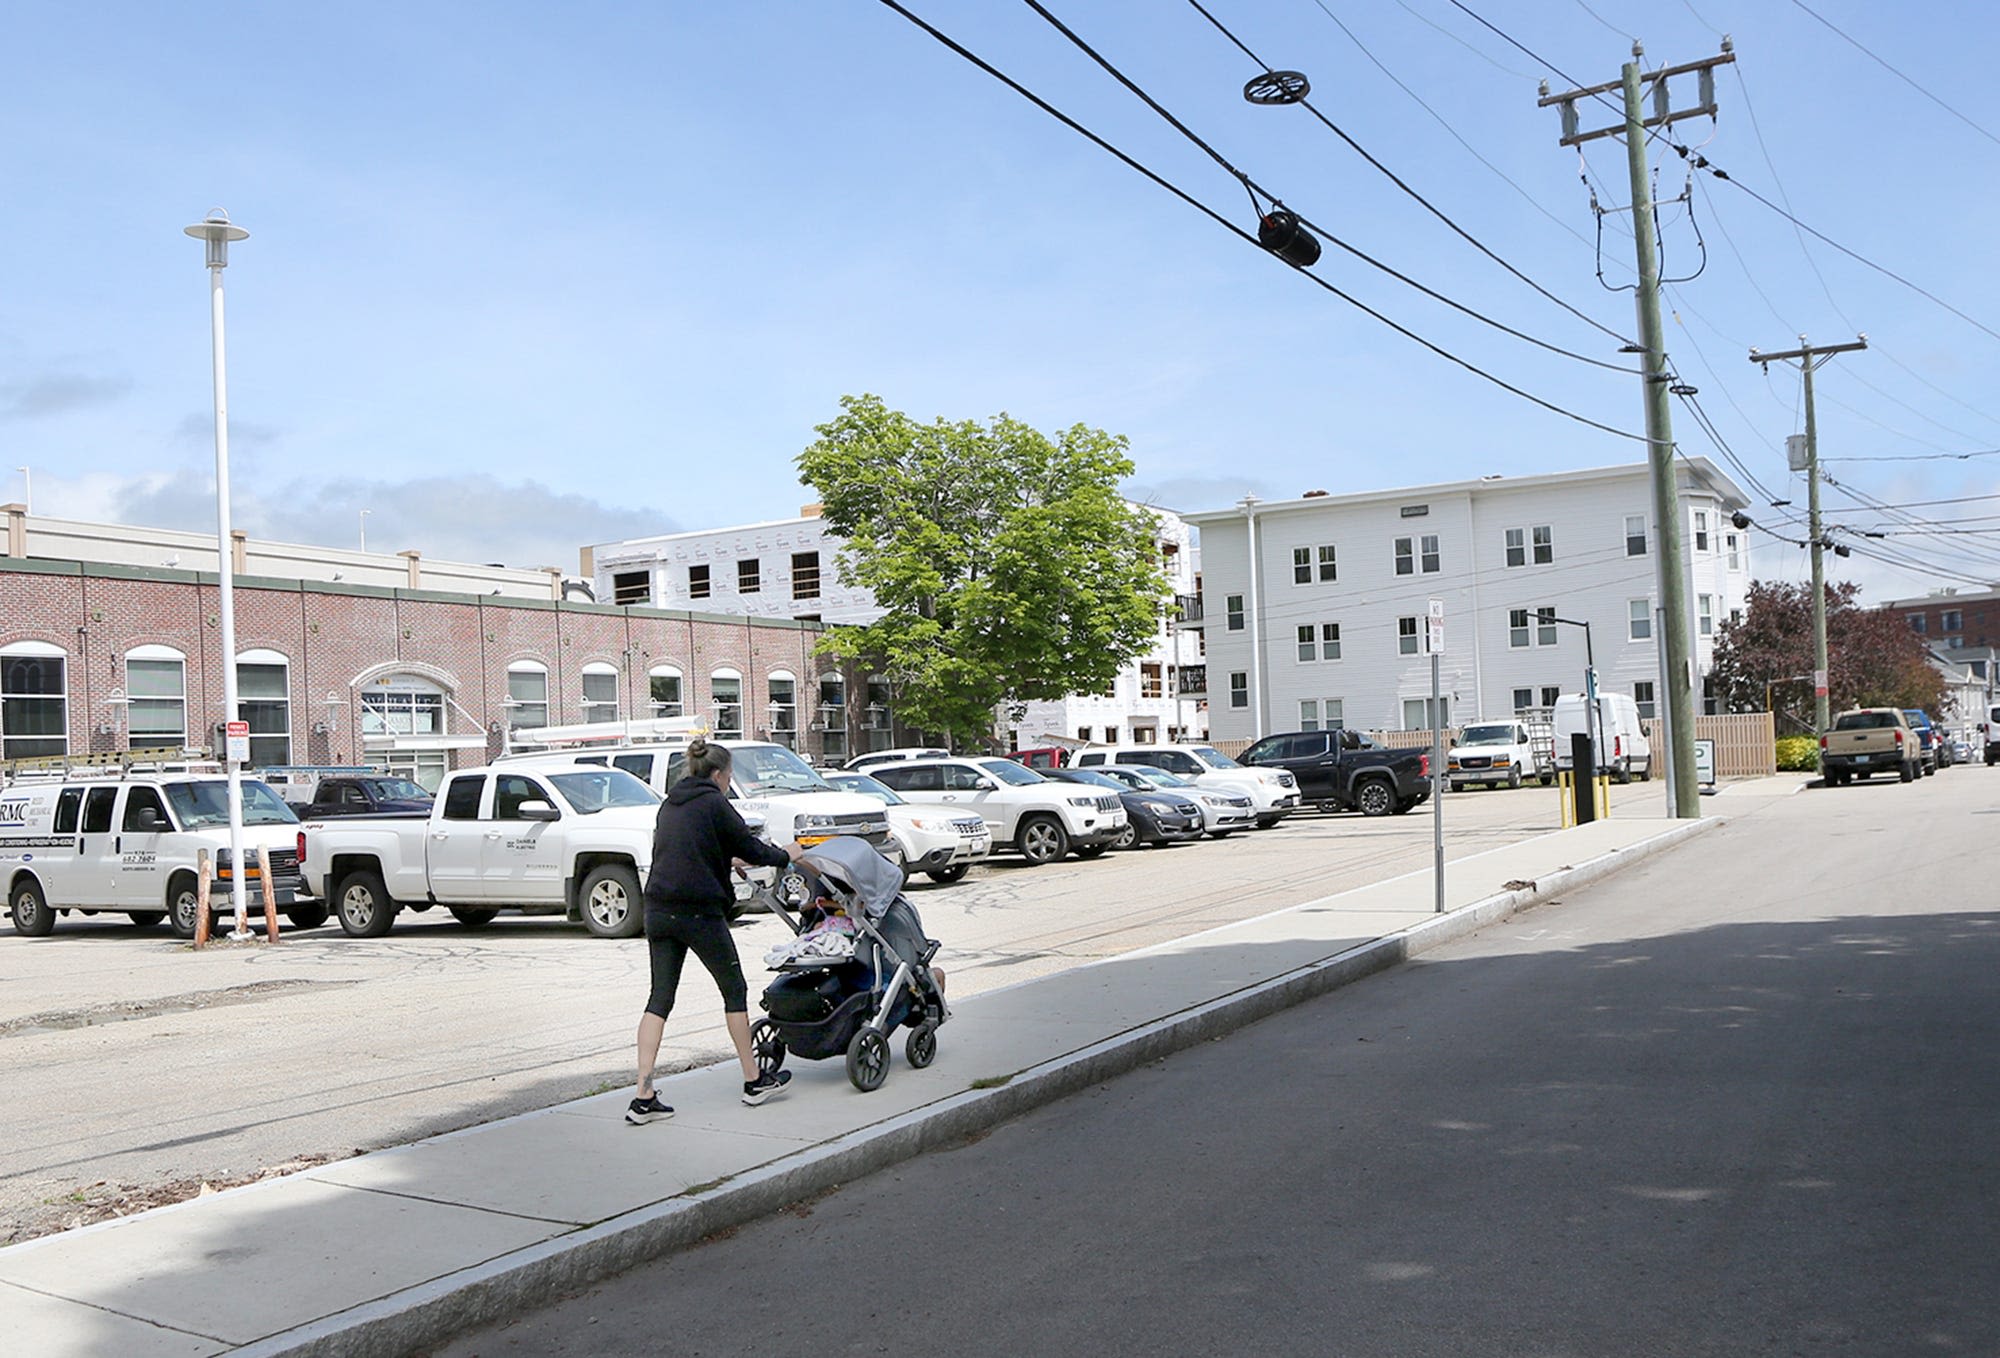 Residents say Portsmouth Steam Factory redevelopment could destroy historic neighborhood